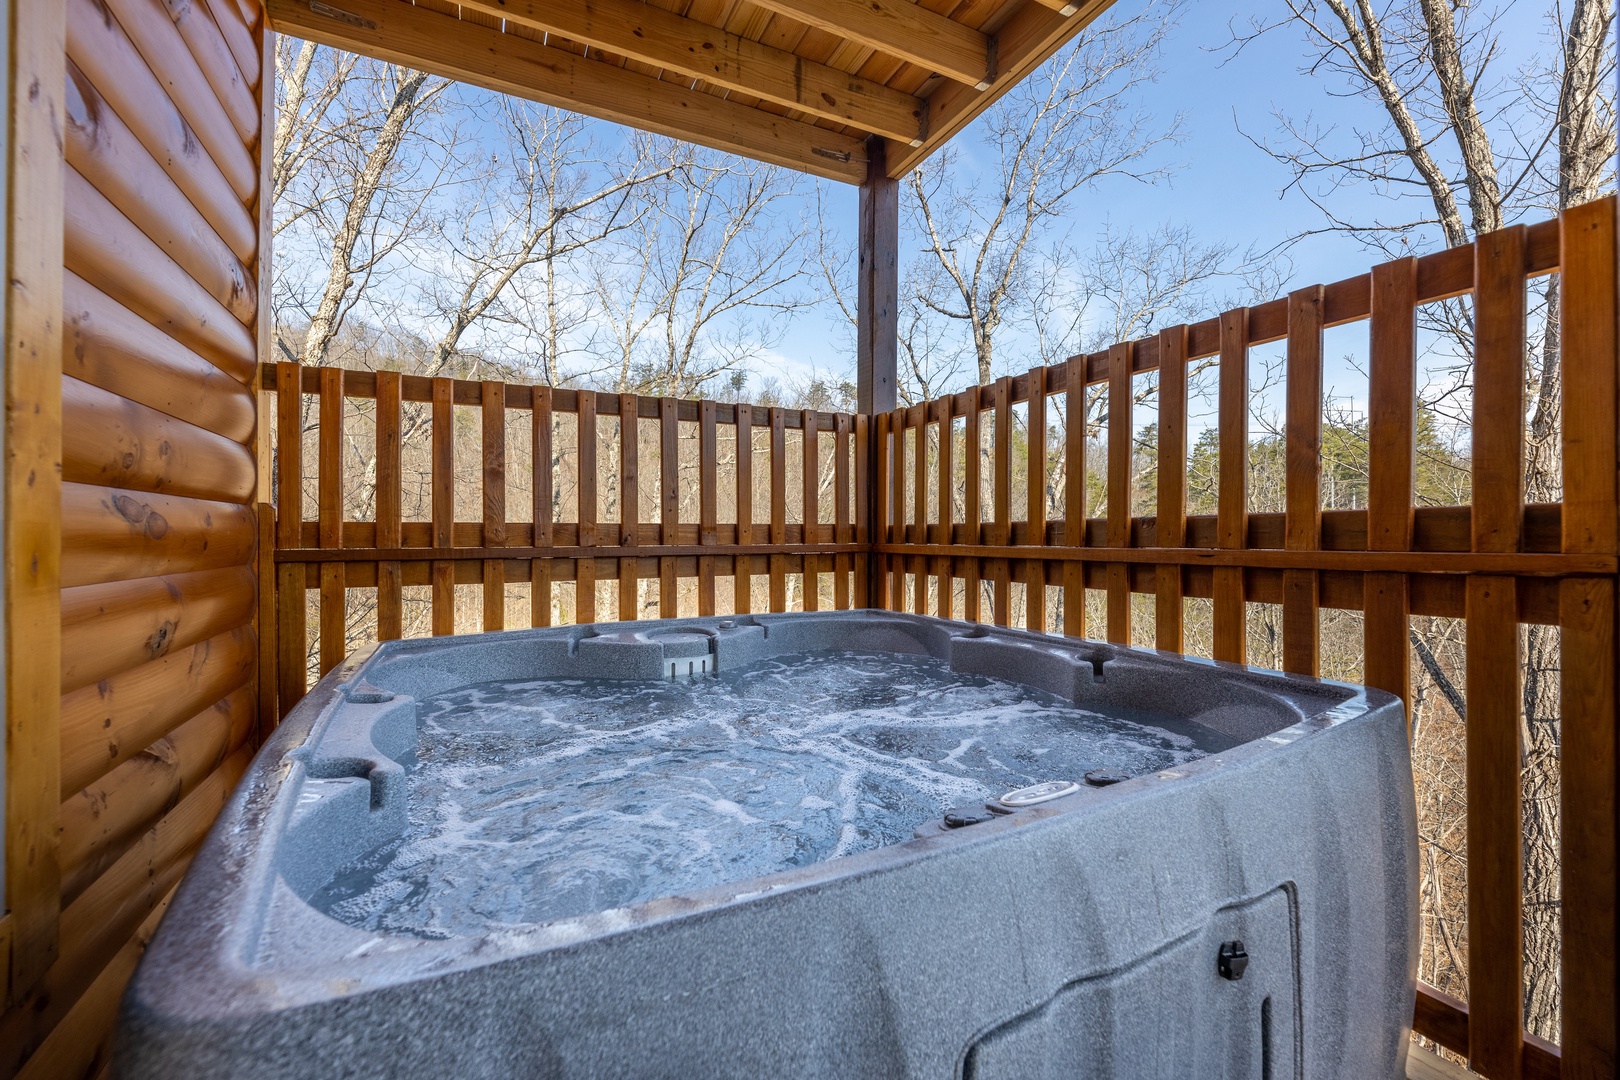 Hot tub on a covered deck at Everly's Splash, a 4 bedroom cabin rental located in Pigeon Forge